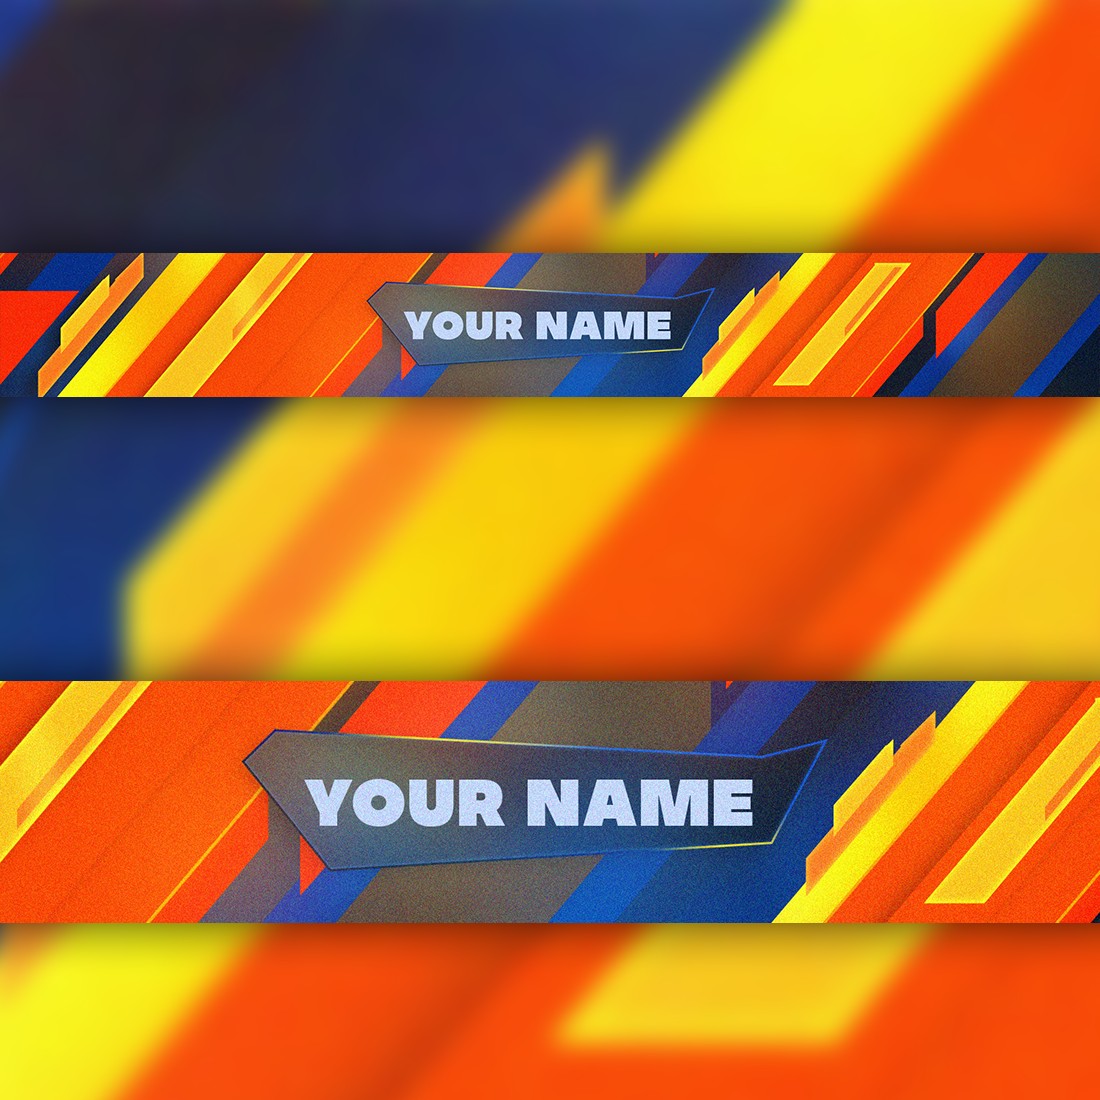 Youtube Banner Template (Youtube Channel Art) cover image.